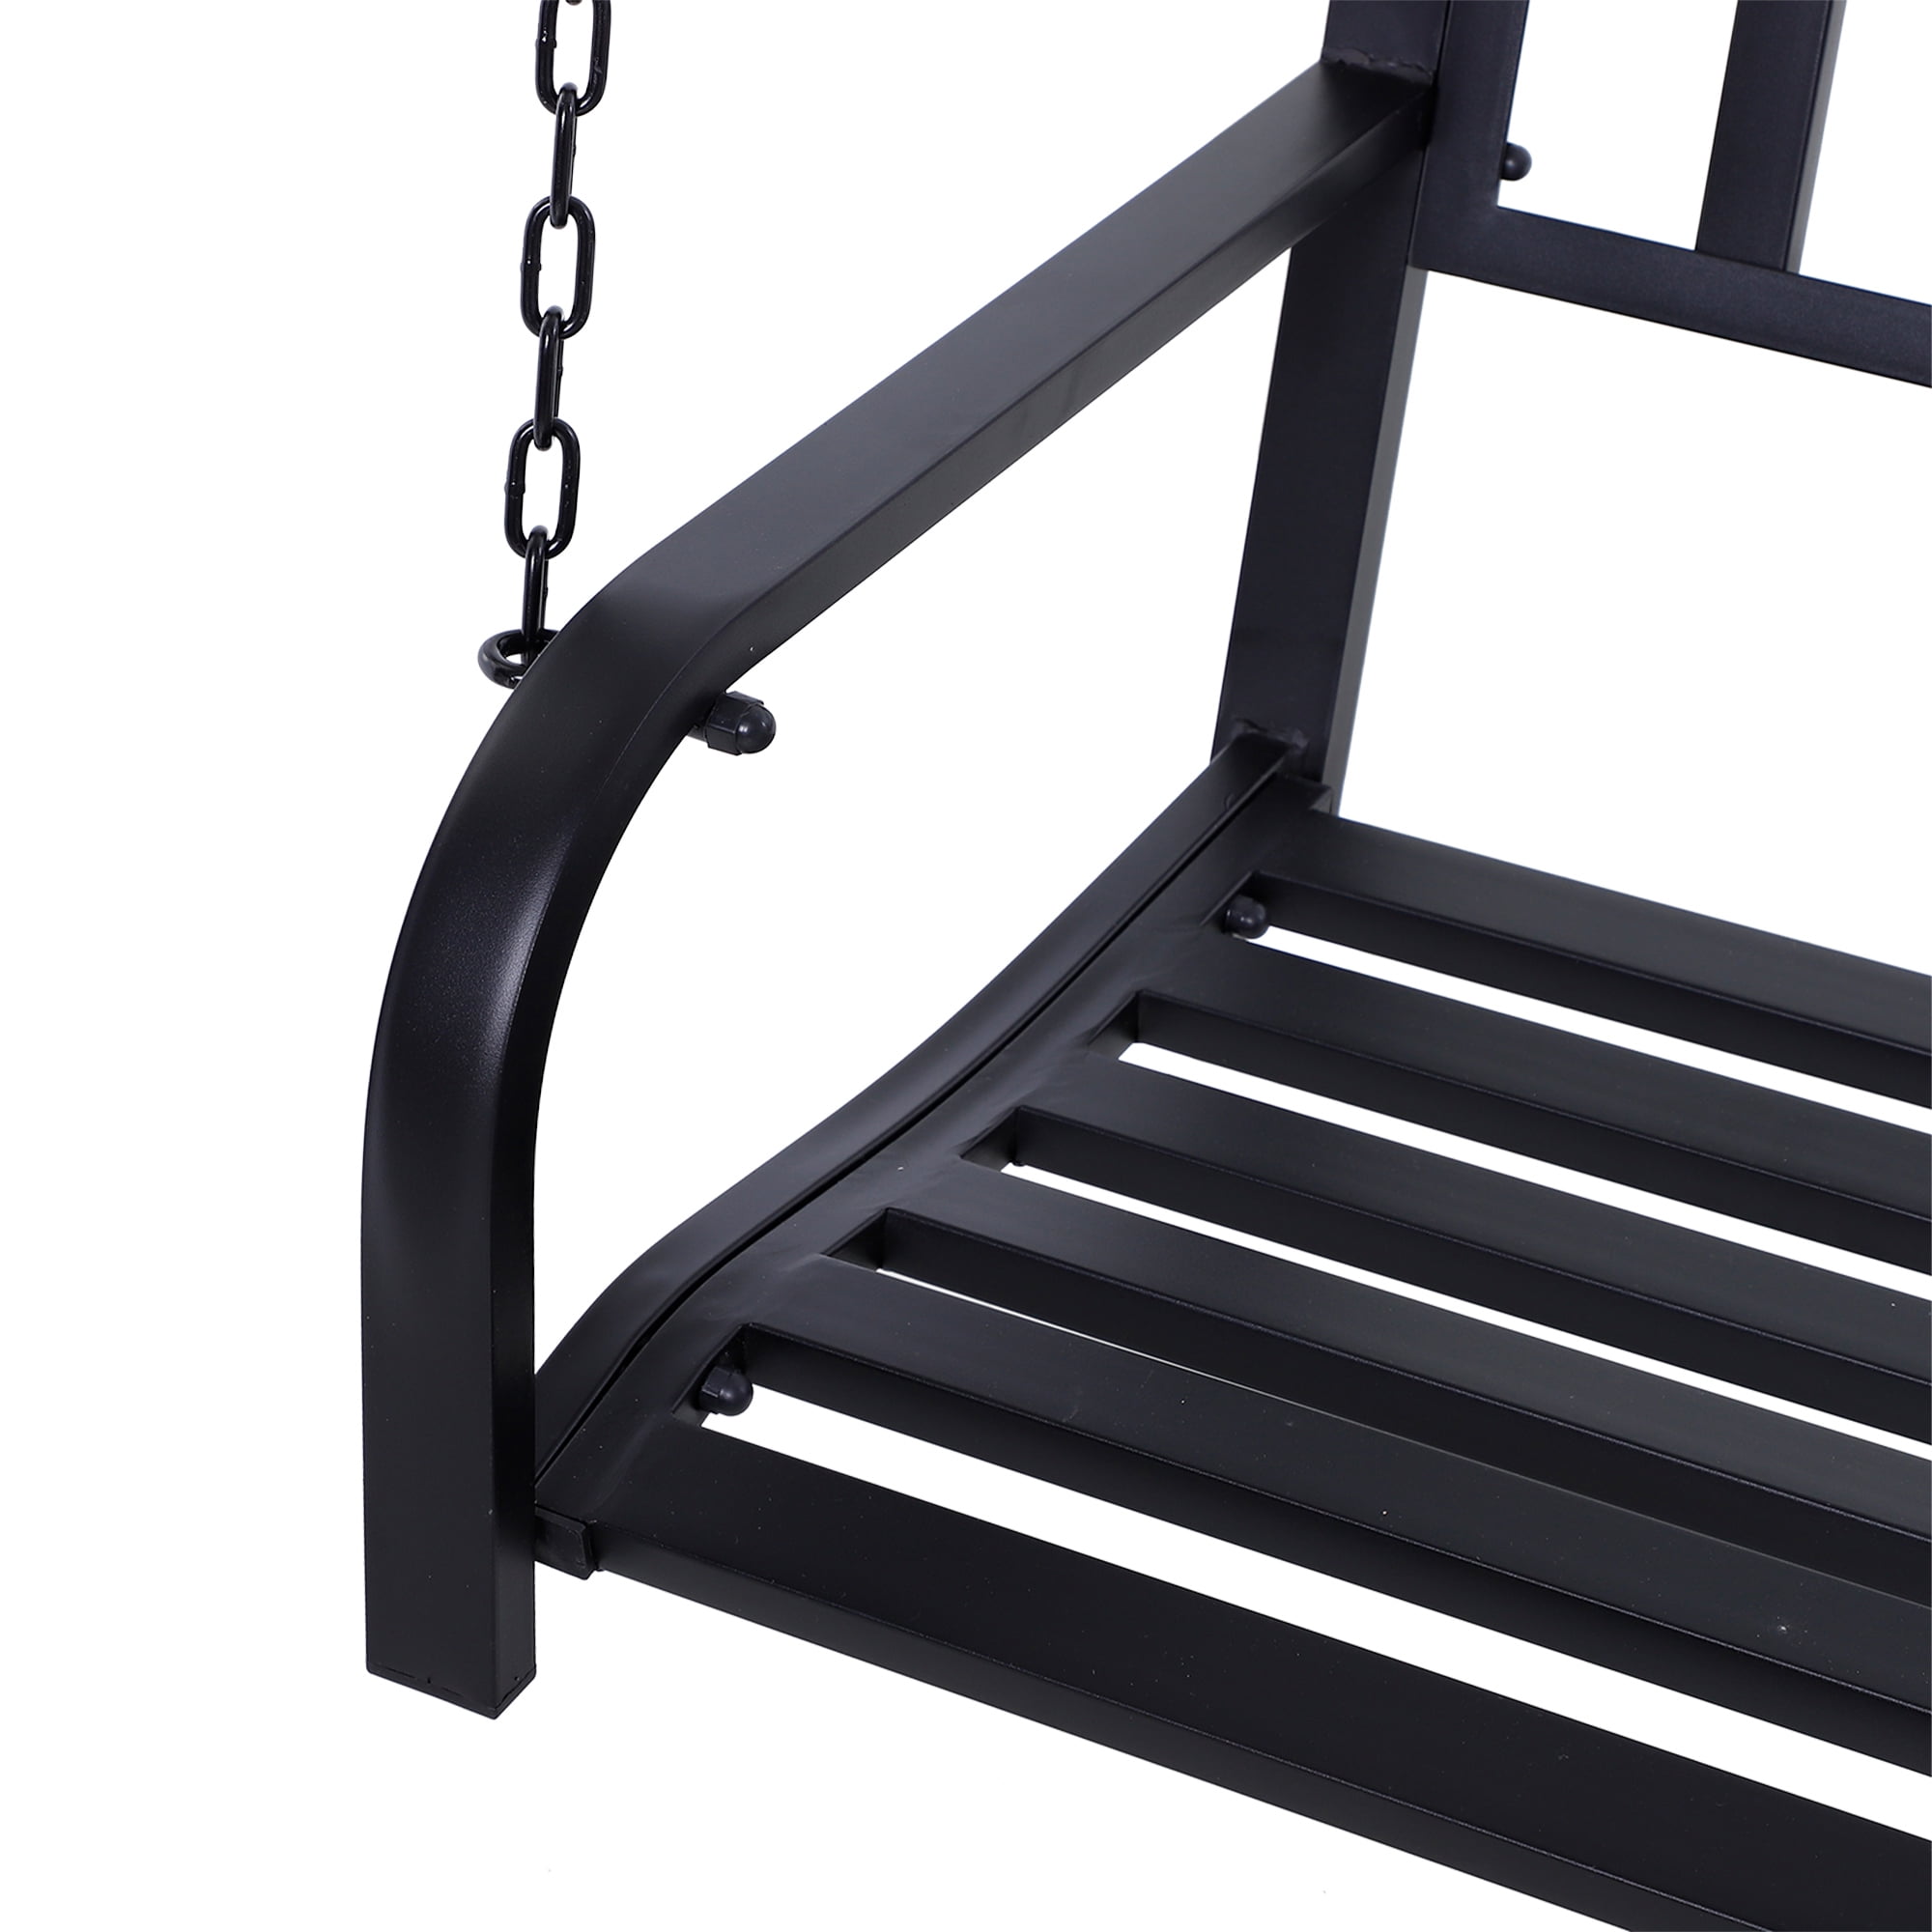 Outsunny 50 Porch Swing Hanging Bench Outdoor Glider Chair with Chain Black